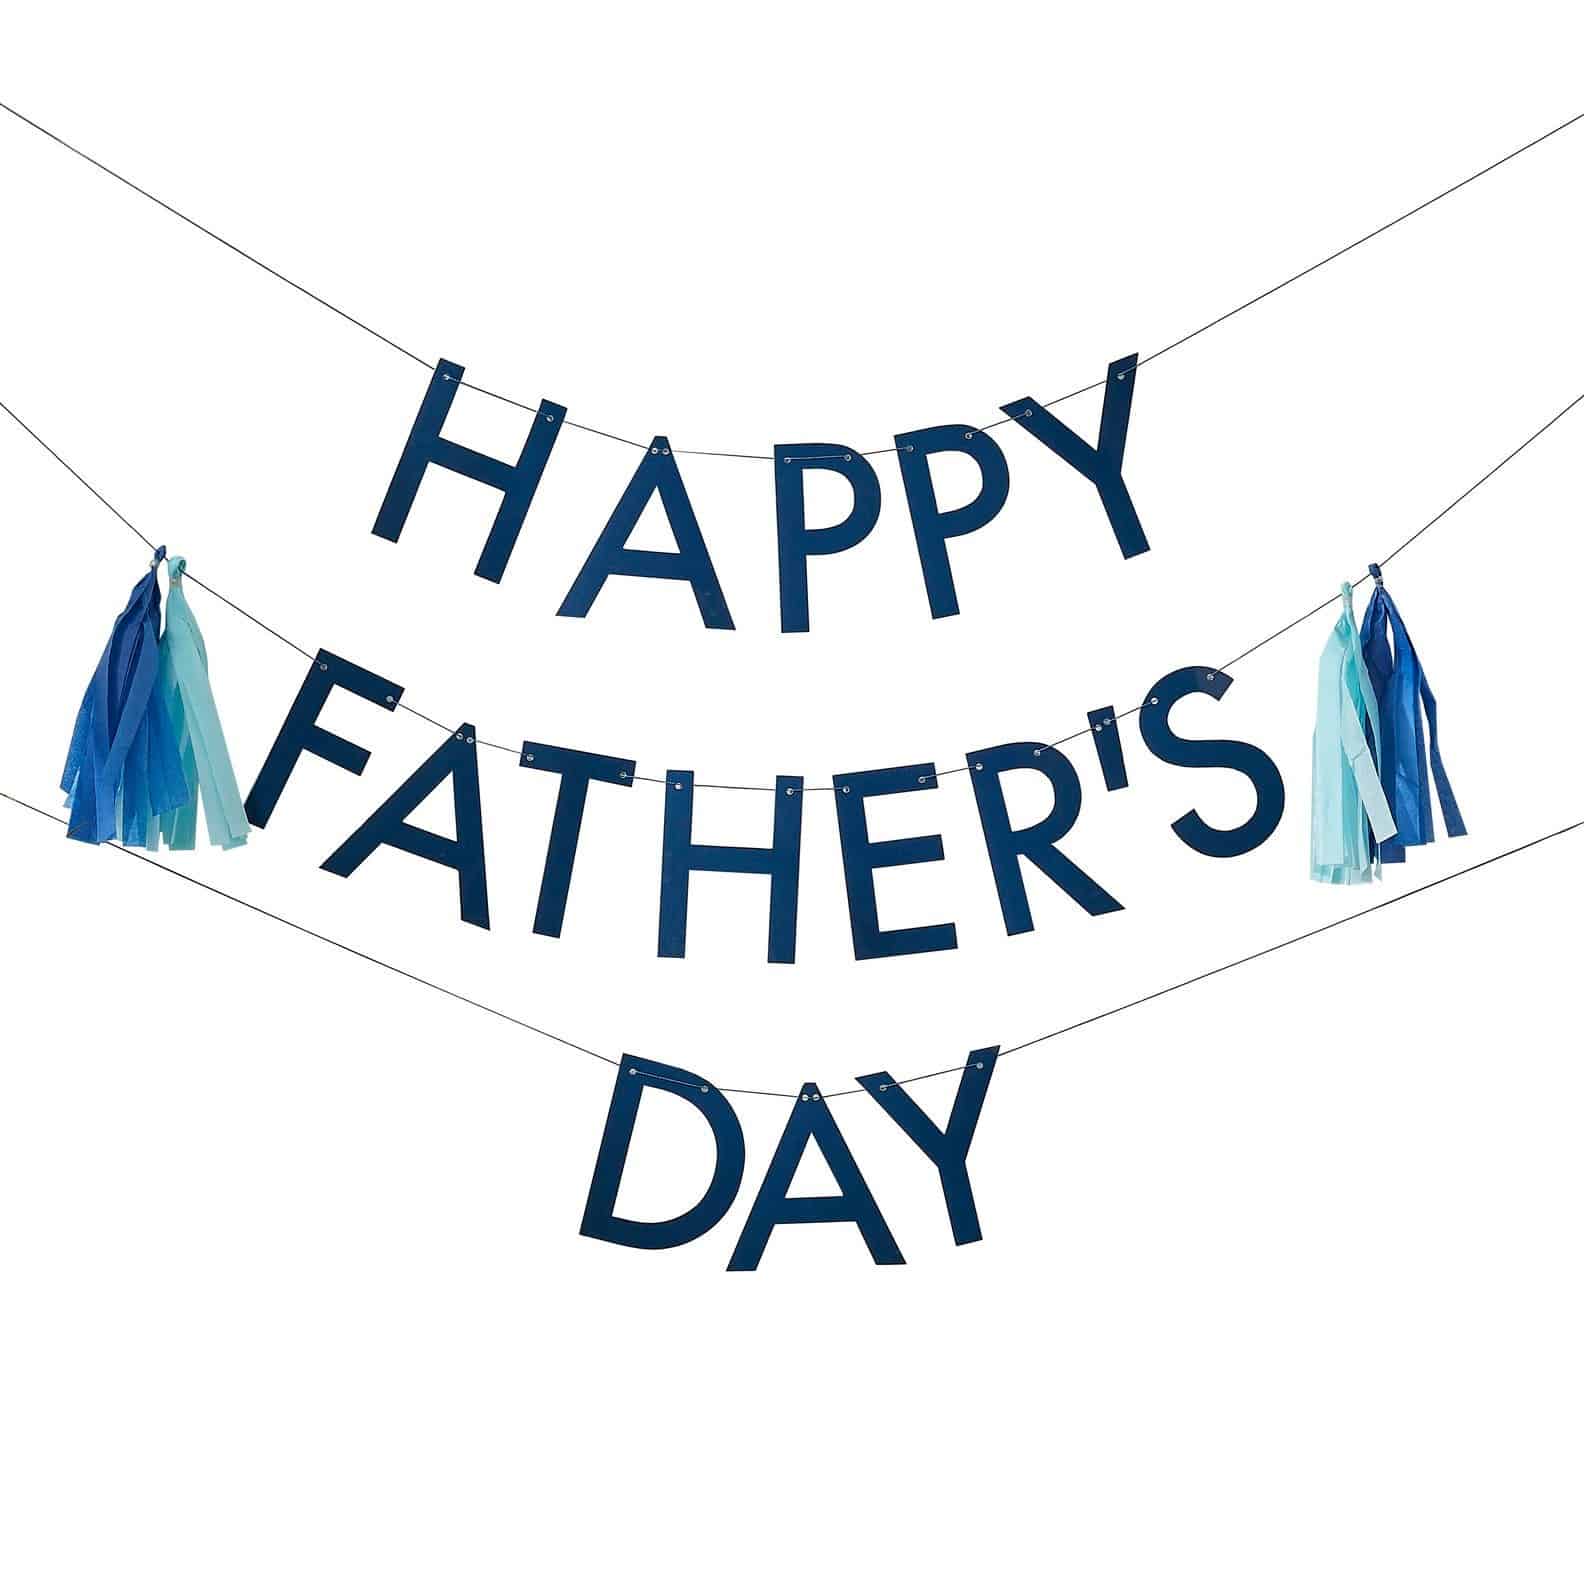 Happy Fathers Day Banner with Tassels